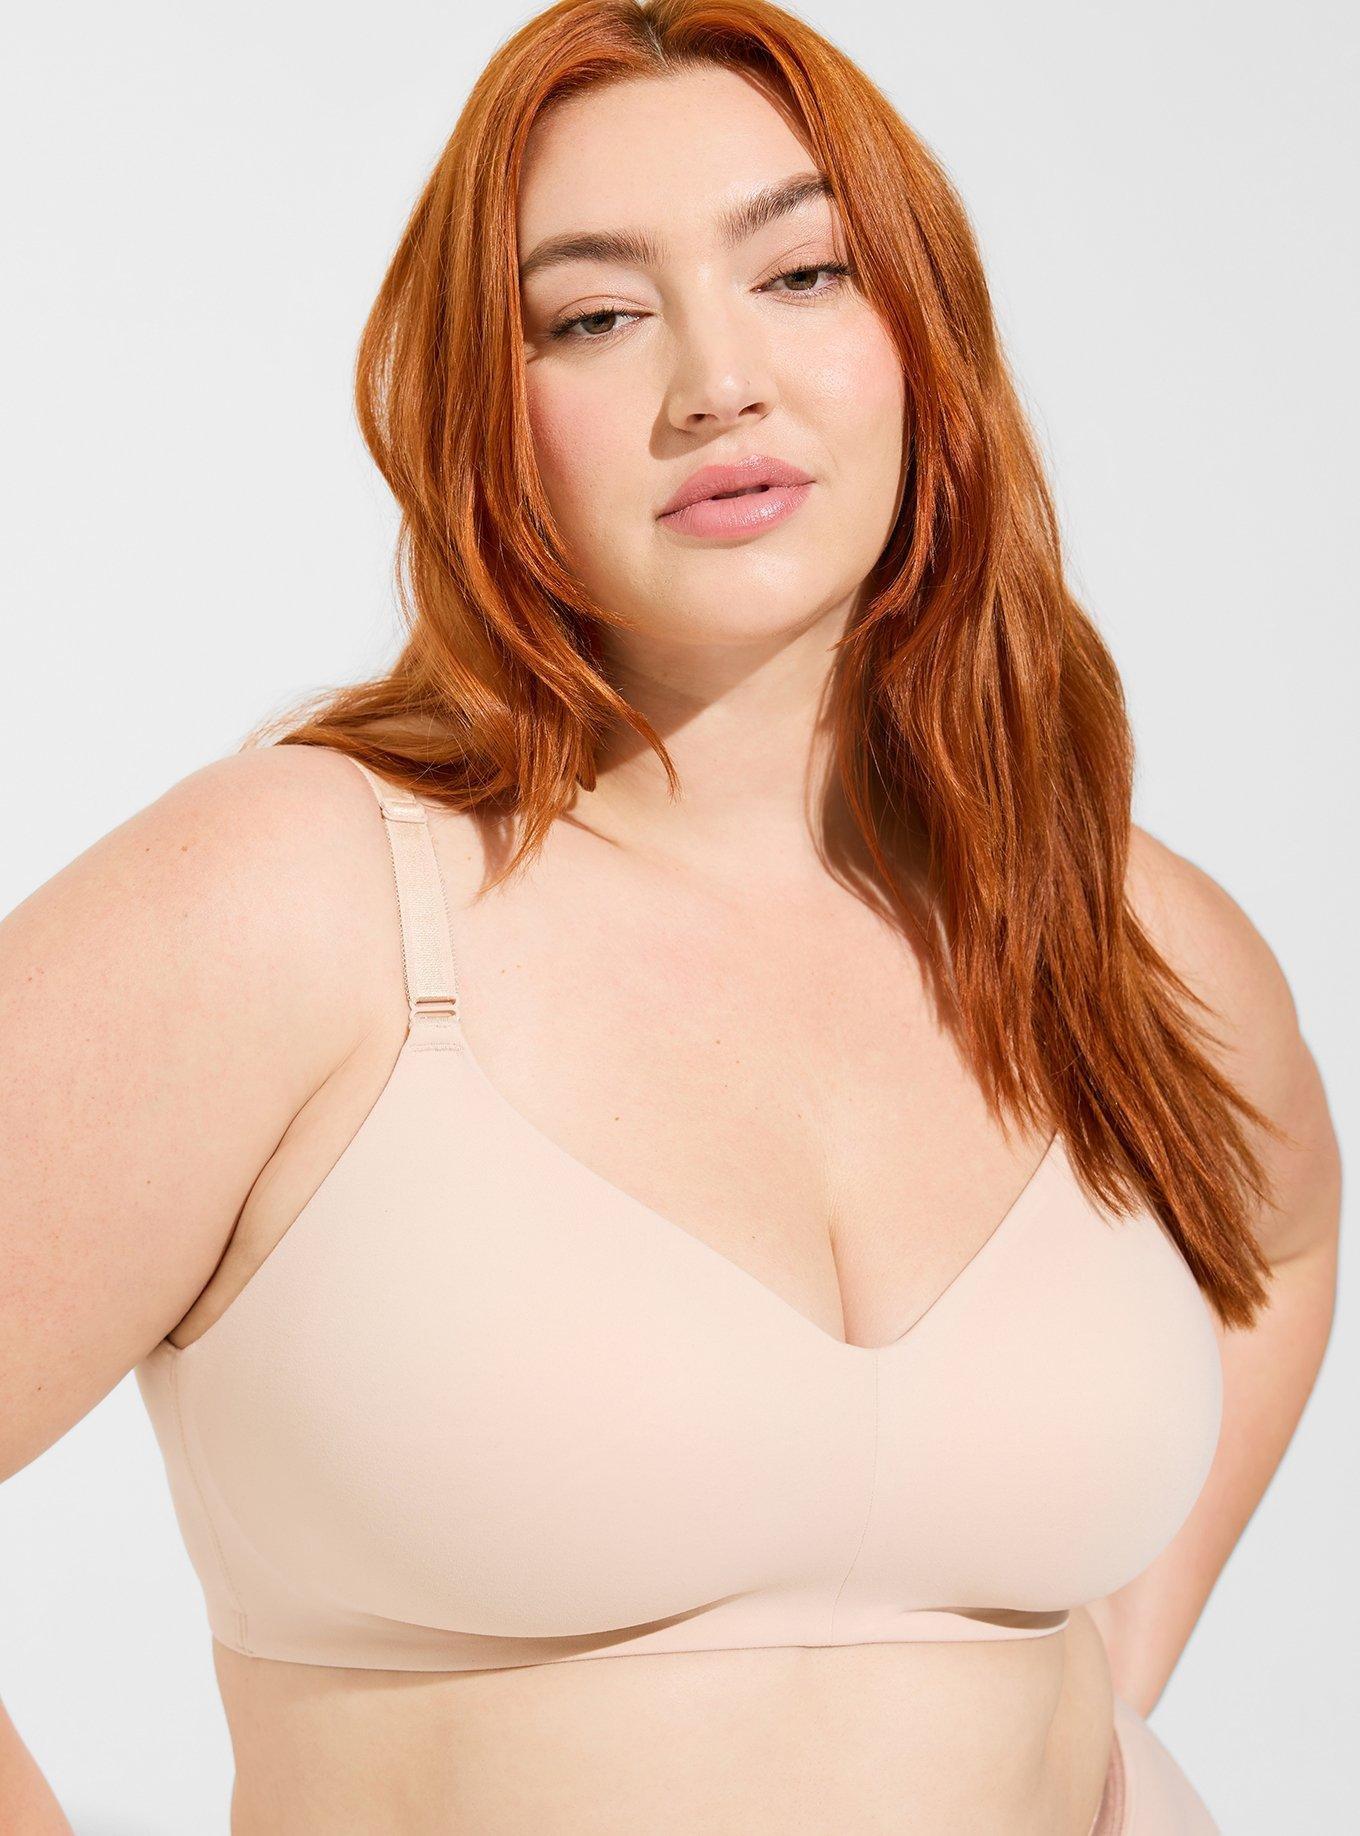 I have 38G boobs and hate when they look saggy – my favorite bra